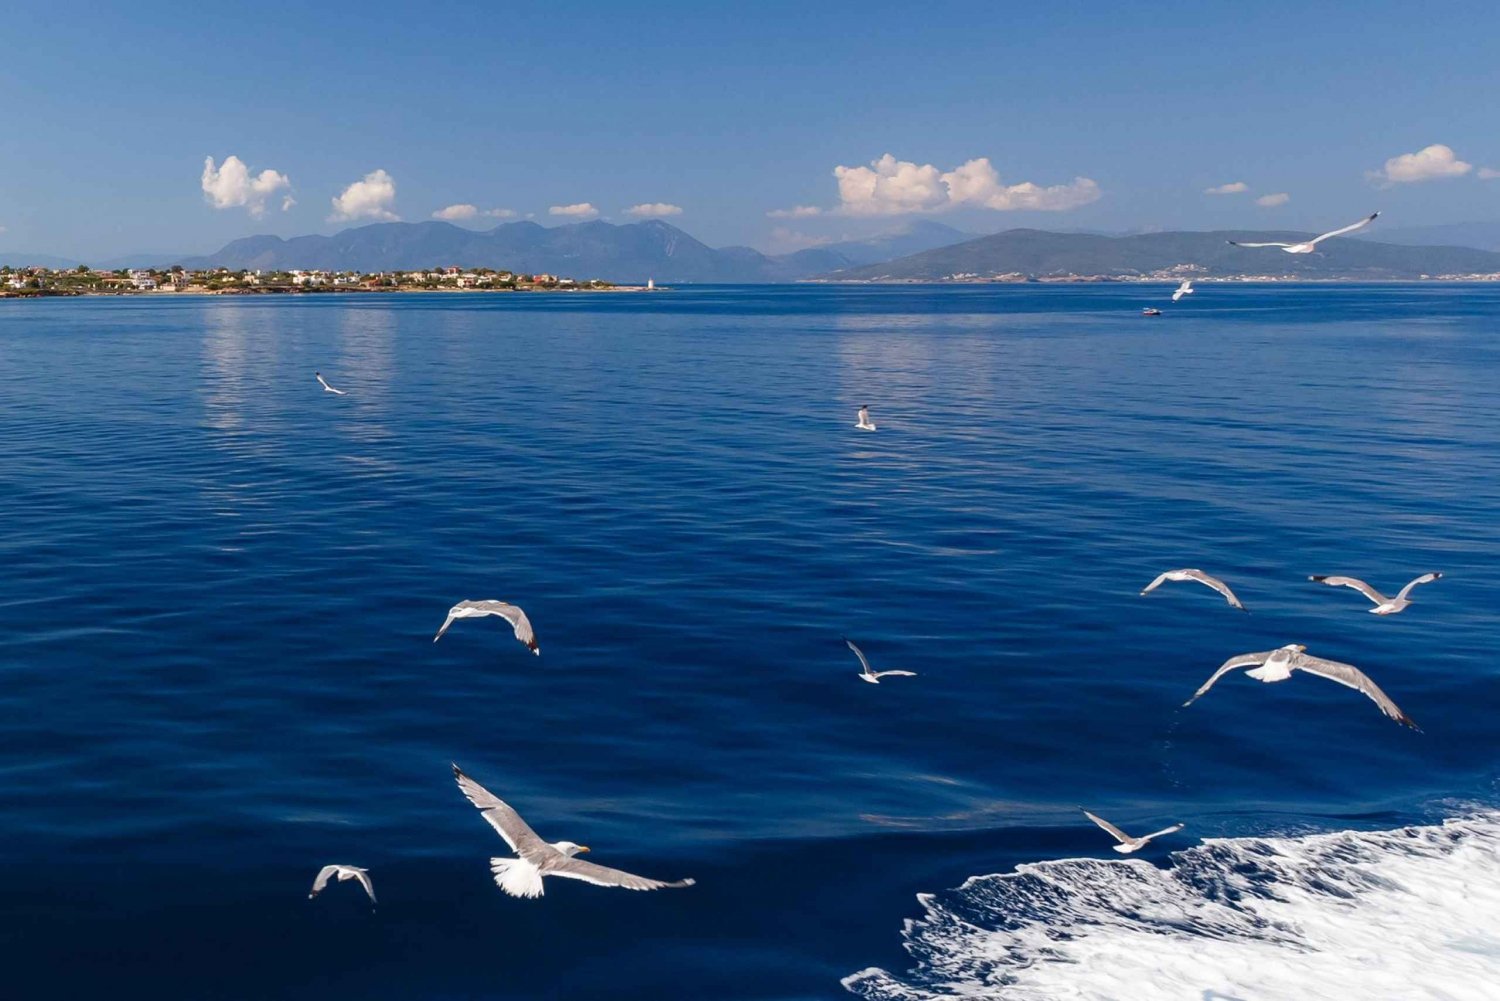 Athens: Guided Day Trip to Aegina Island with Swimming